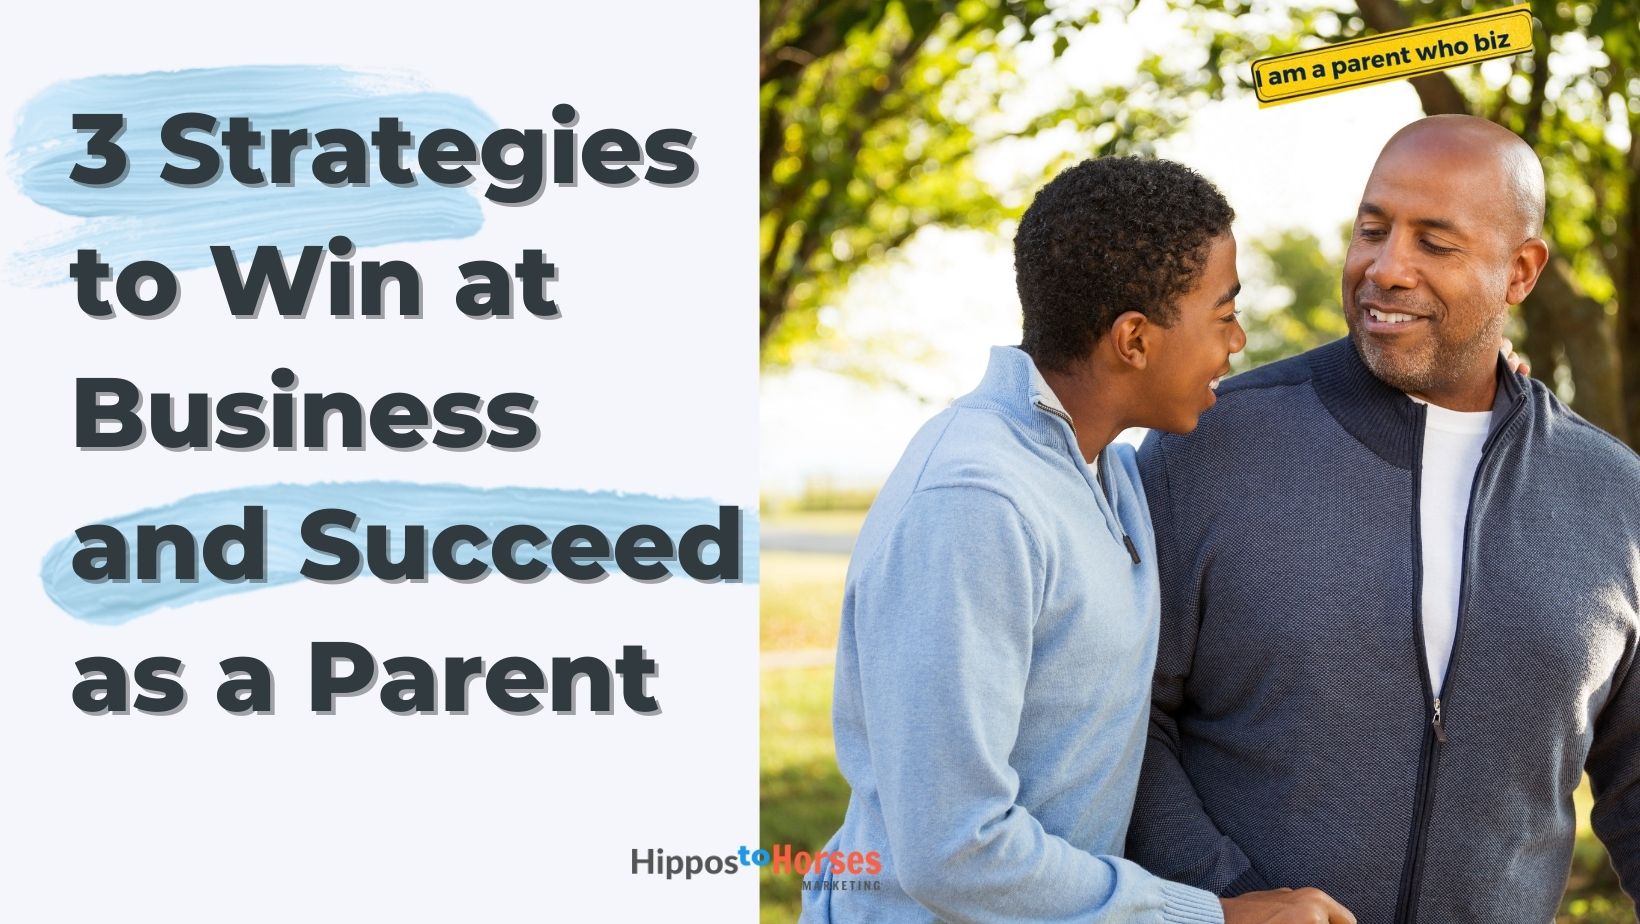 Hippos to Horses Marketing -3 Strategies to Win at Business and Succeed as a Parent